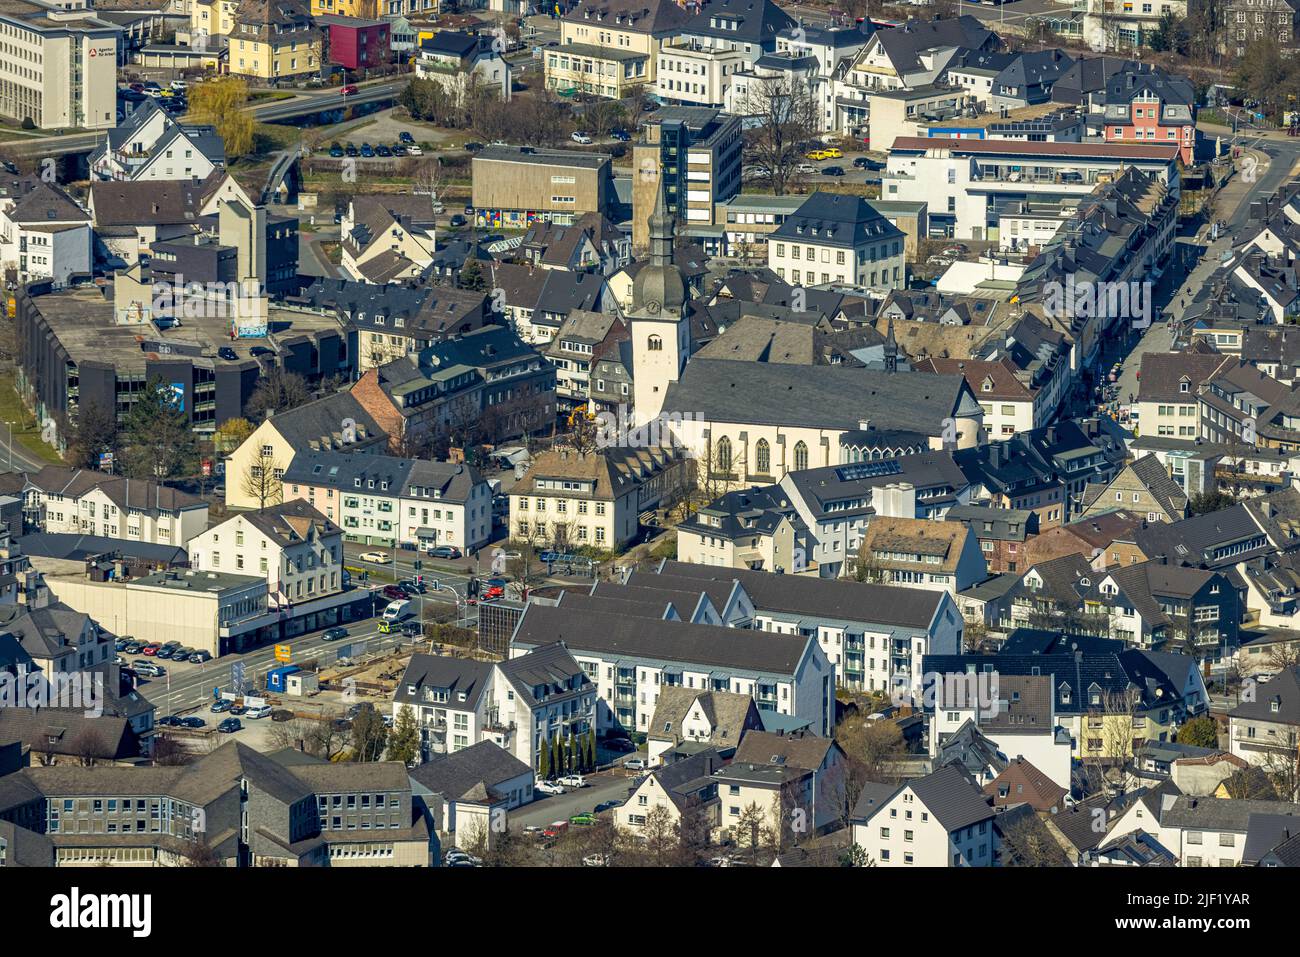 Aerial view, city view downtown and catholic parish church St. Walburga, Meschede town, Meschede, Sauerland, North Rhine-Westphalia, Germany, City, DE Stock Photo